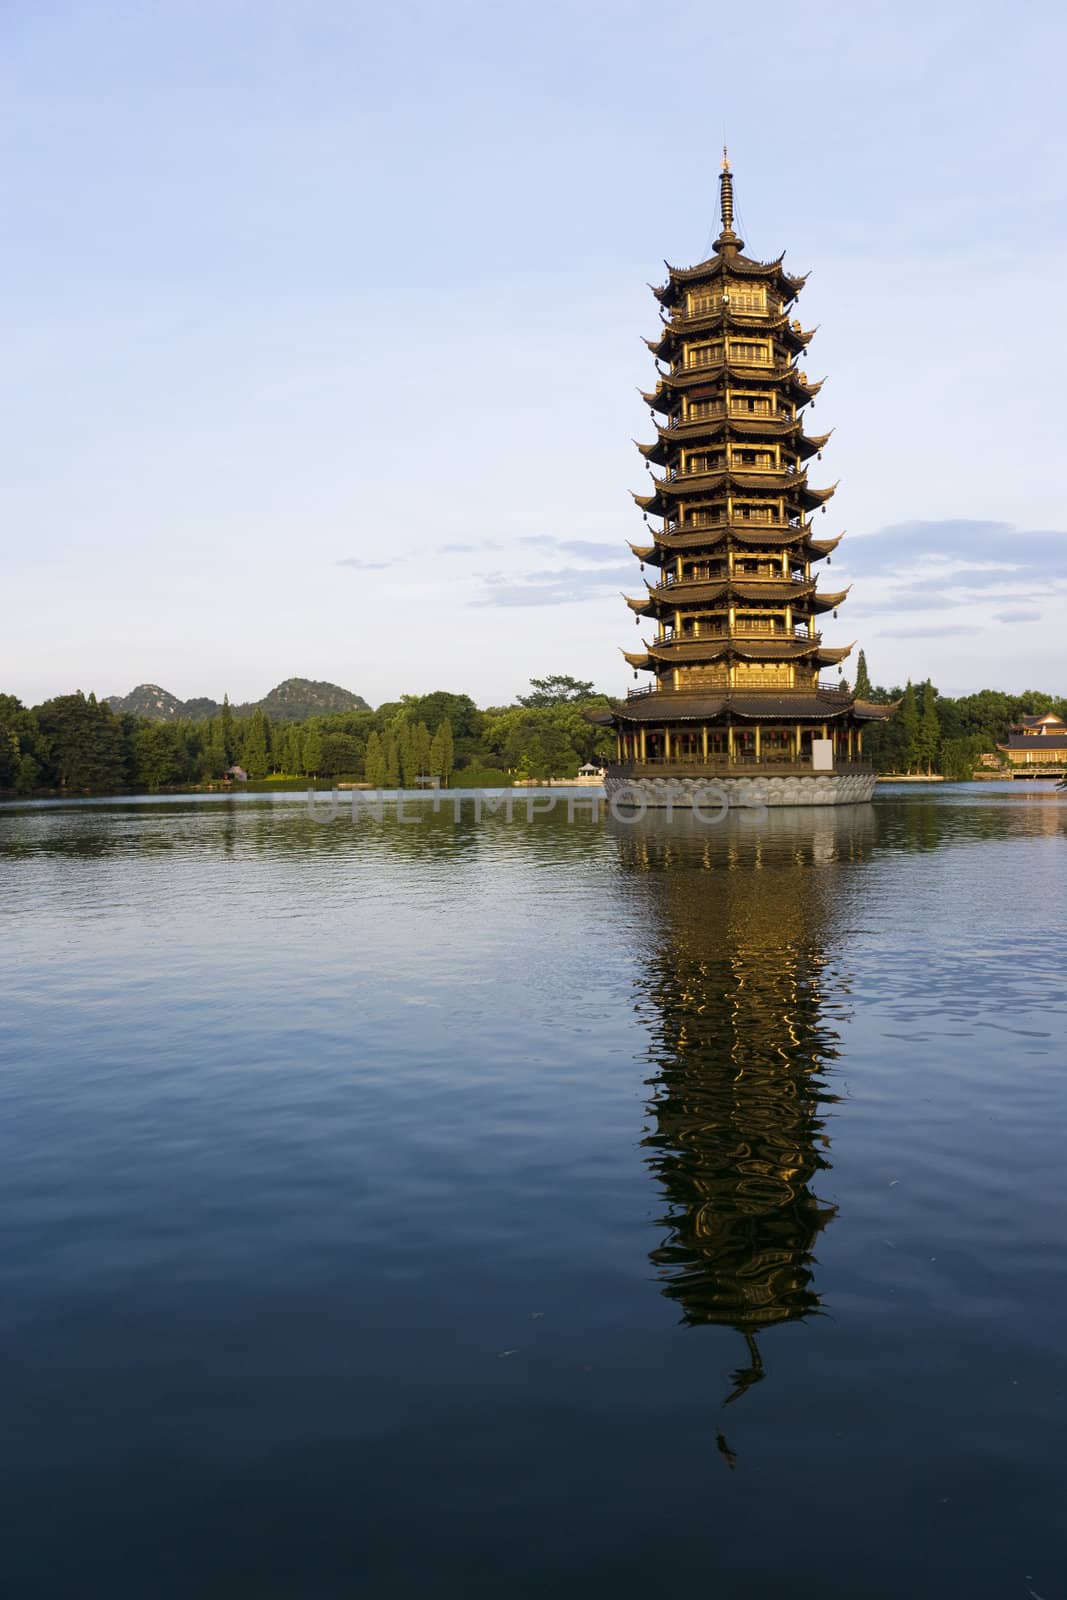 Image of the Sun Pagoda at Guilin, China. This pagoda is one of the two pagodas located side by side which together are known as the Sun and Moon Pagodas of Guilin.